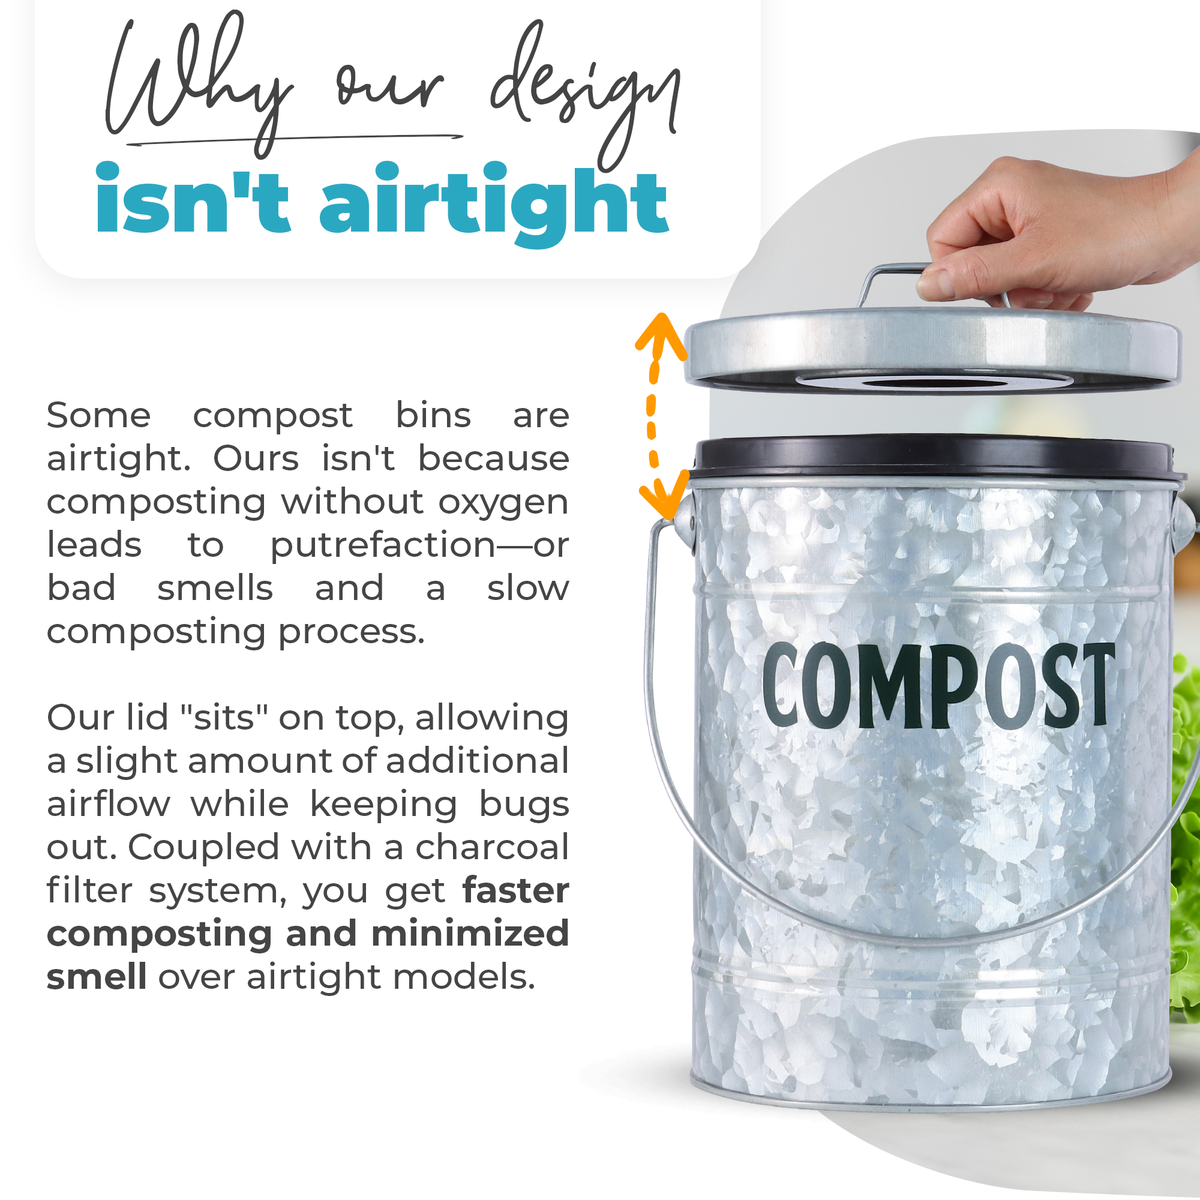 Compost Bin for Kitchen Counter by Saratoga Home - Family Sized, White